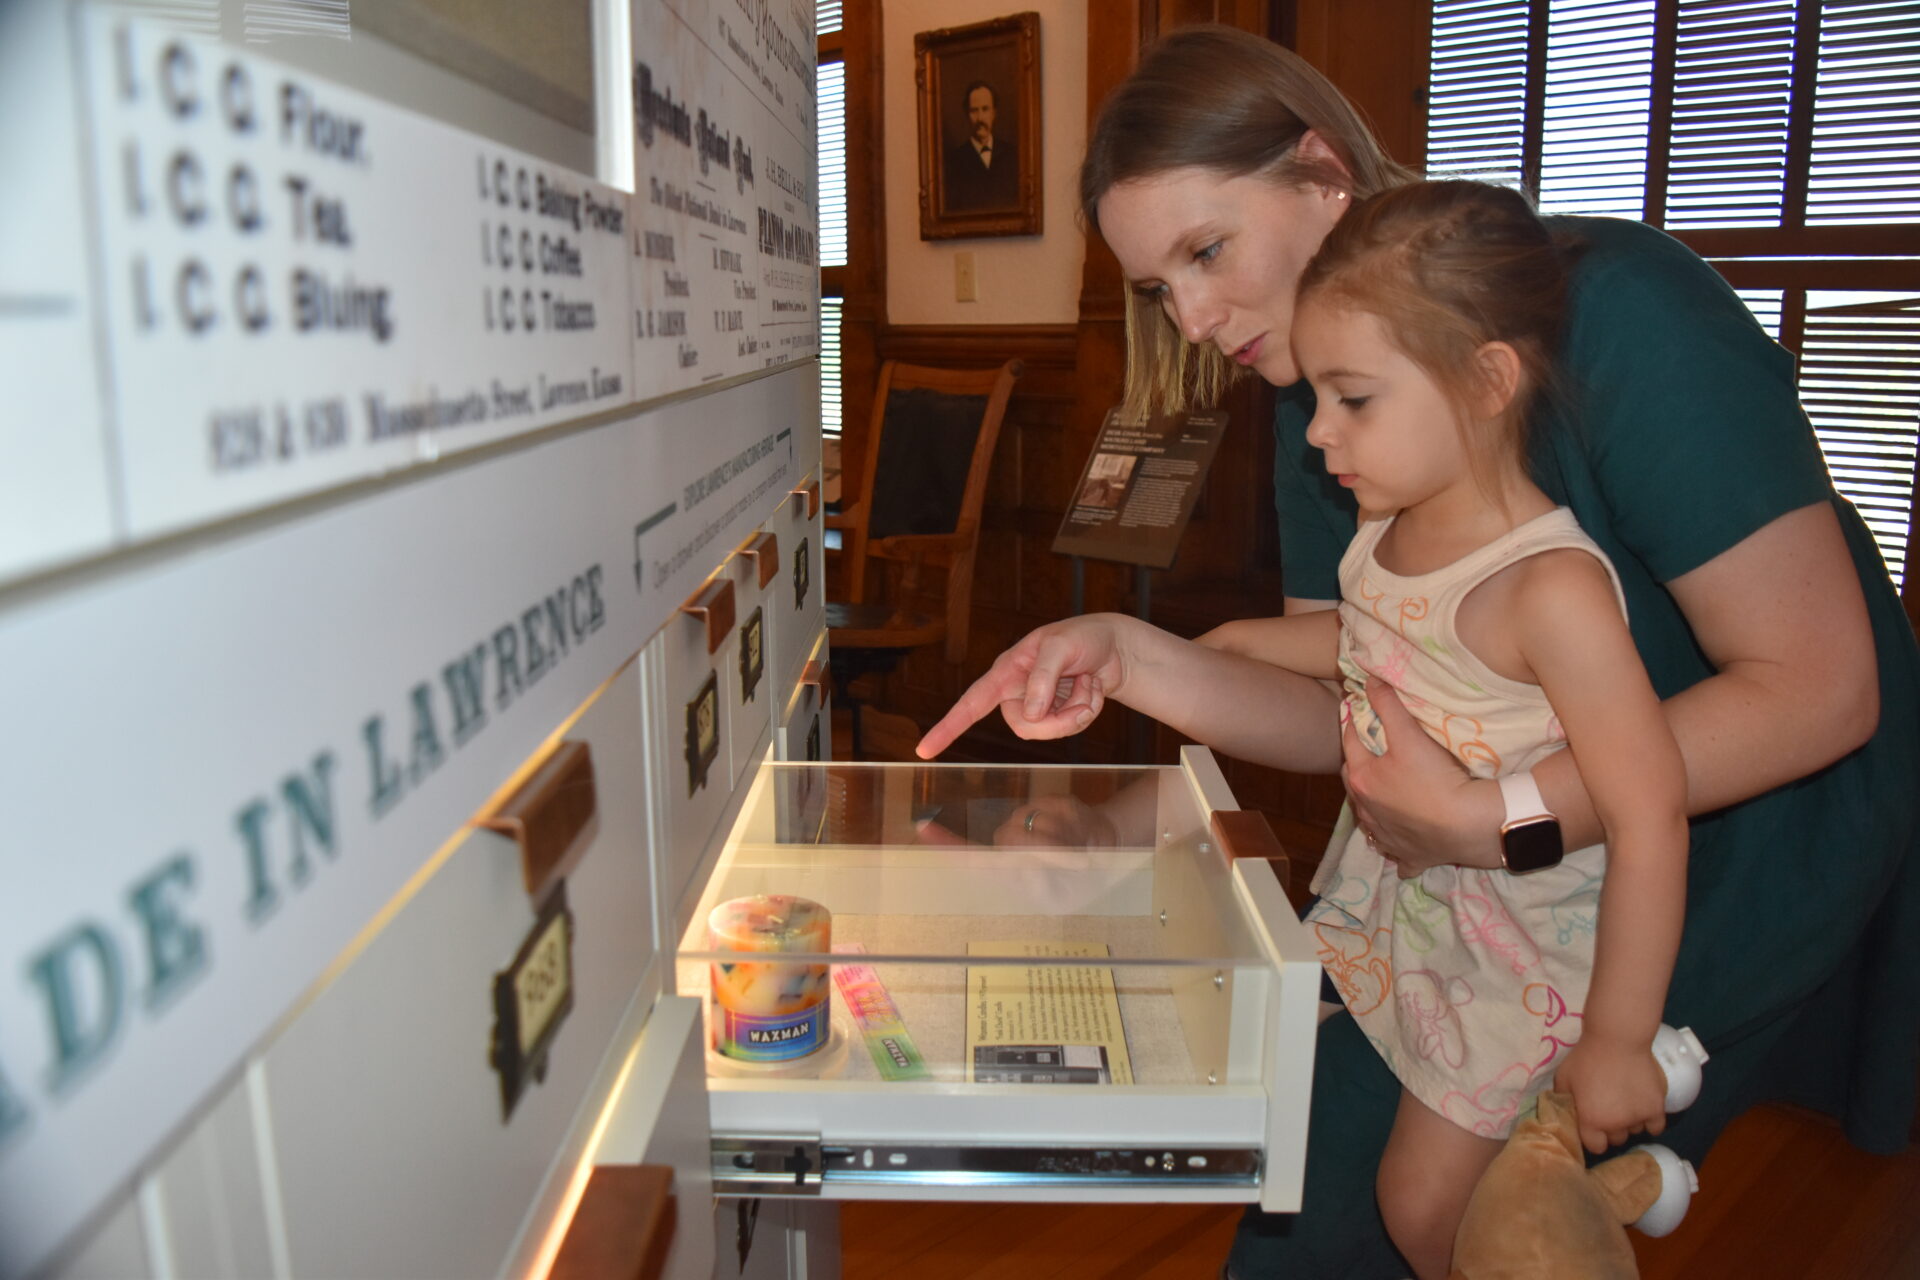 Photograph of a woman and young girl exploring an interactive exhibit.